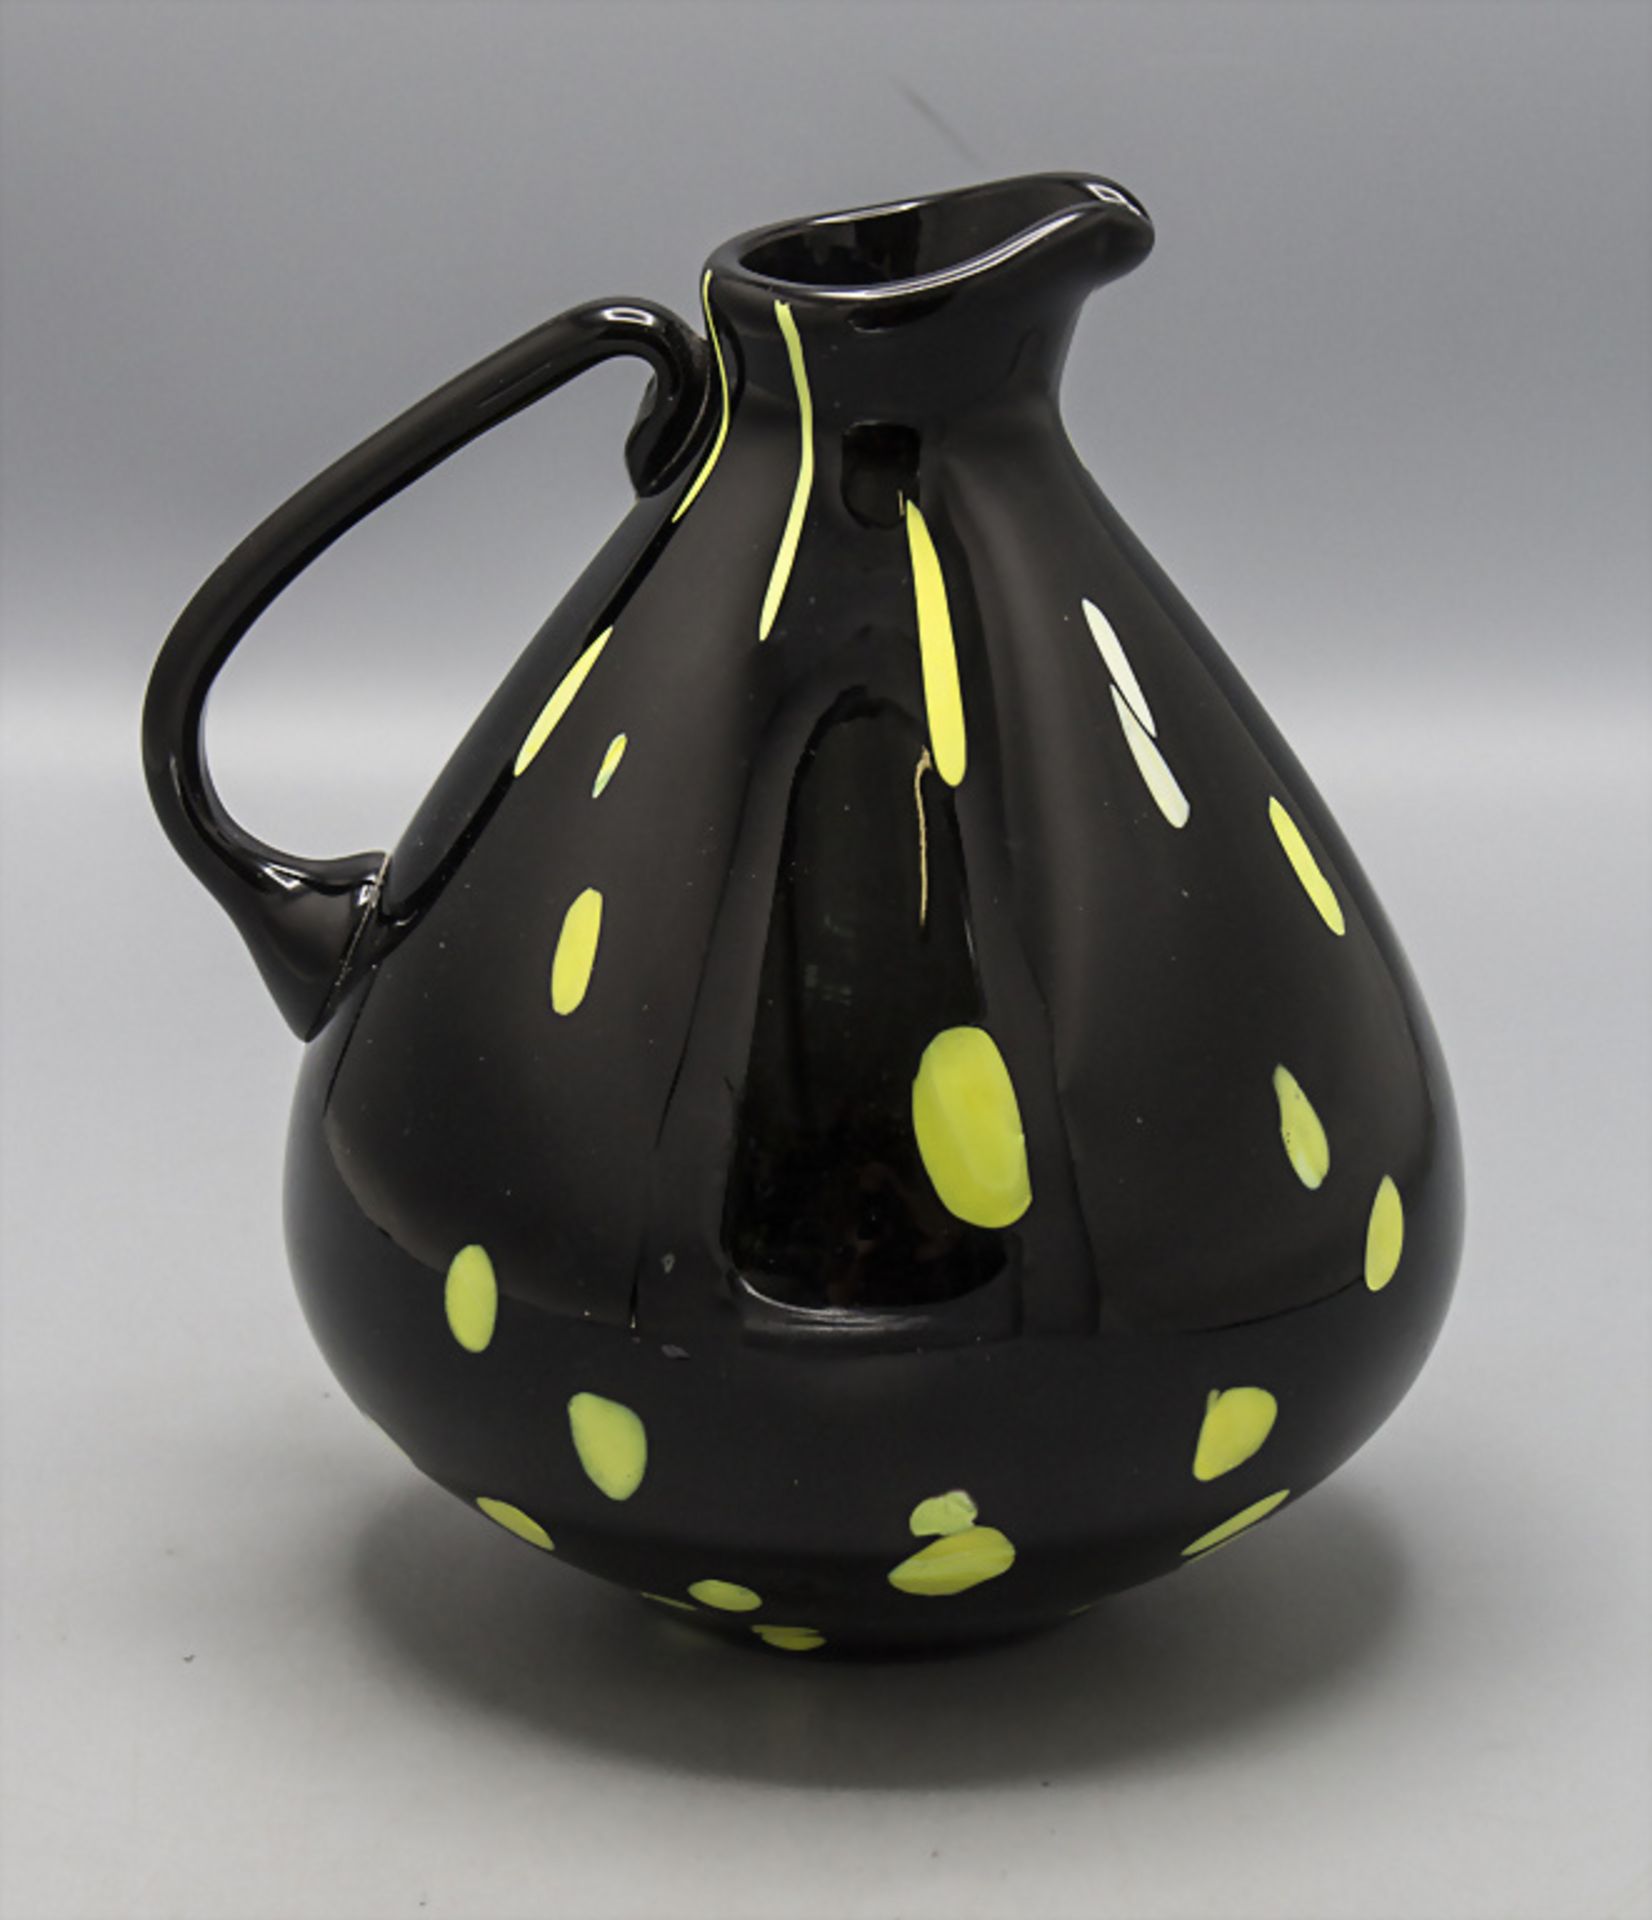 Henkelvase / A glass vase with handles, Murano, 50/60er Jahre - Image 3 of 4